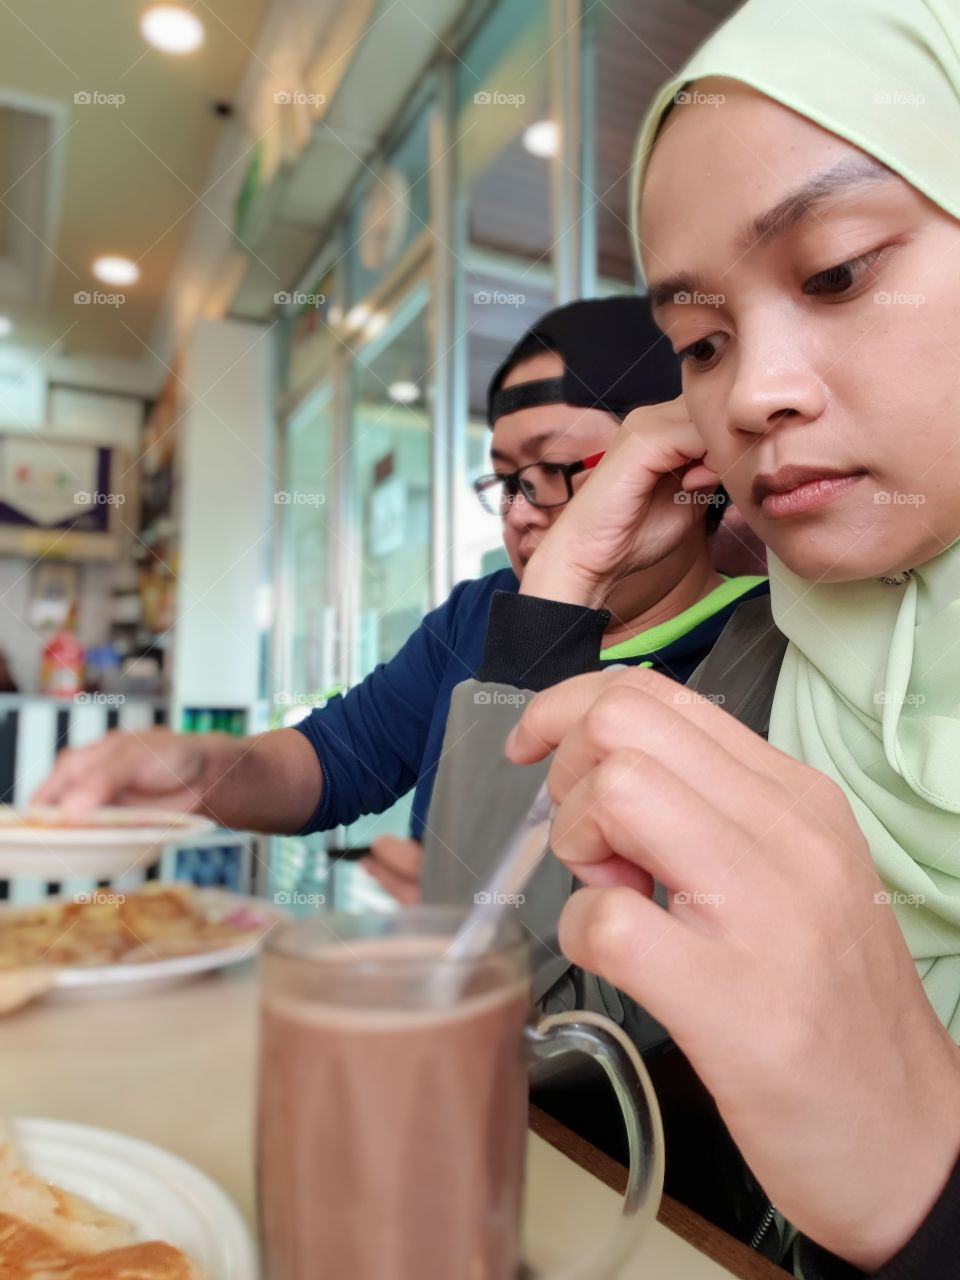 Me having hot drink milo for breakfast with my tomboy sister